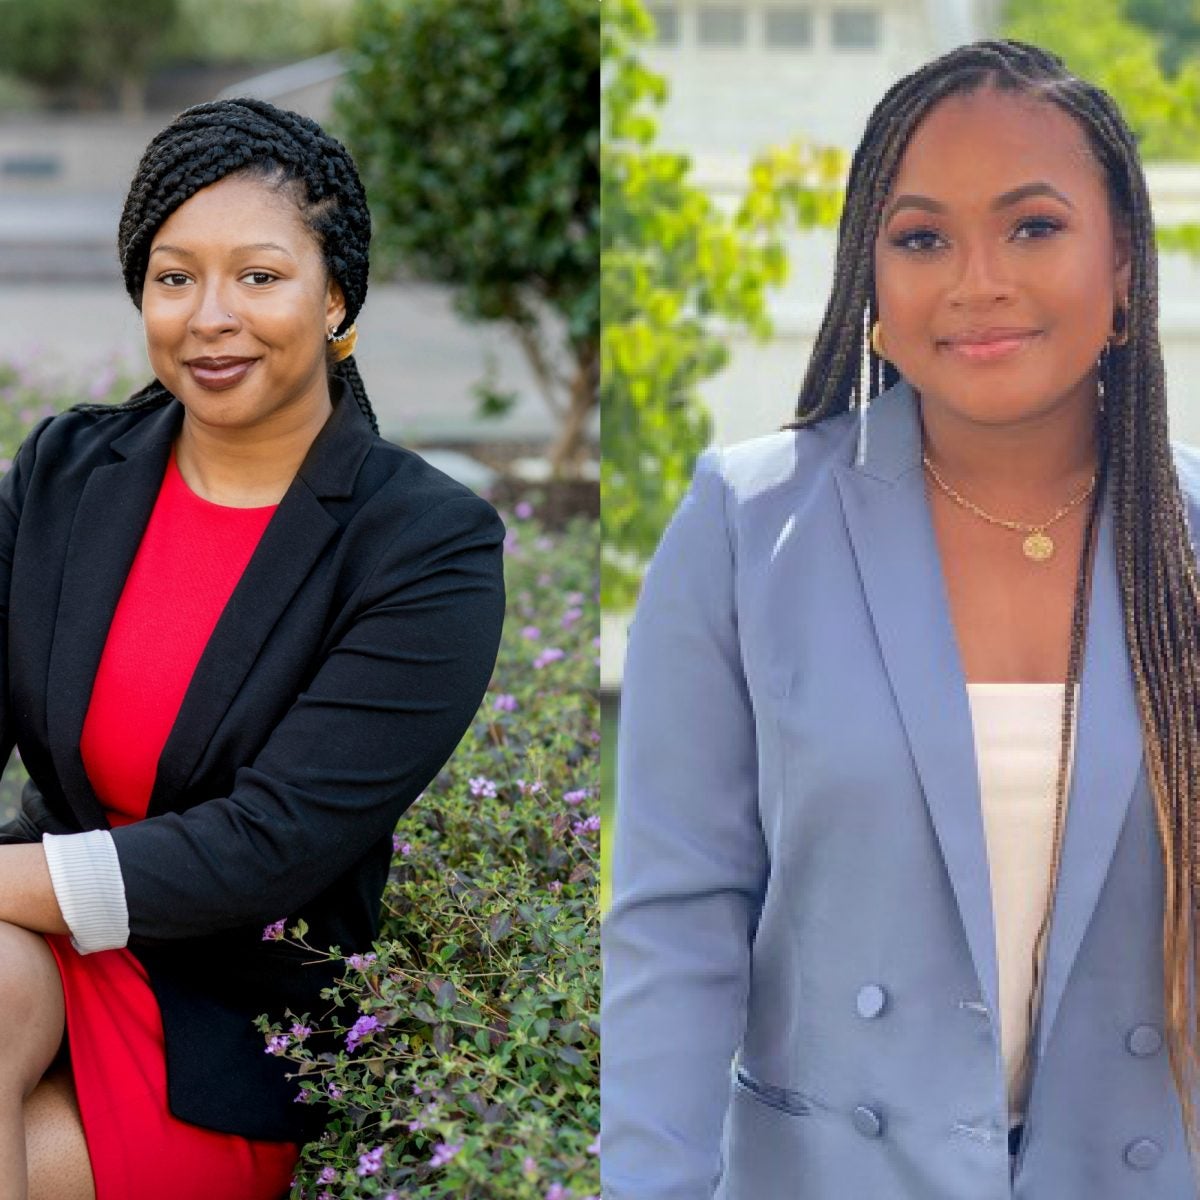 These Black Women Entrepreneurs Just Won $10,000 In Funding! See Their Winning Moment